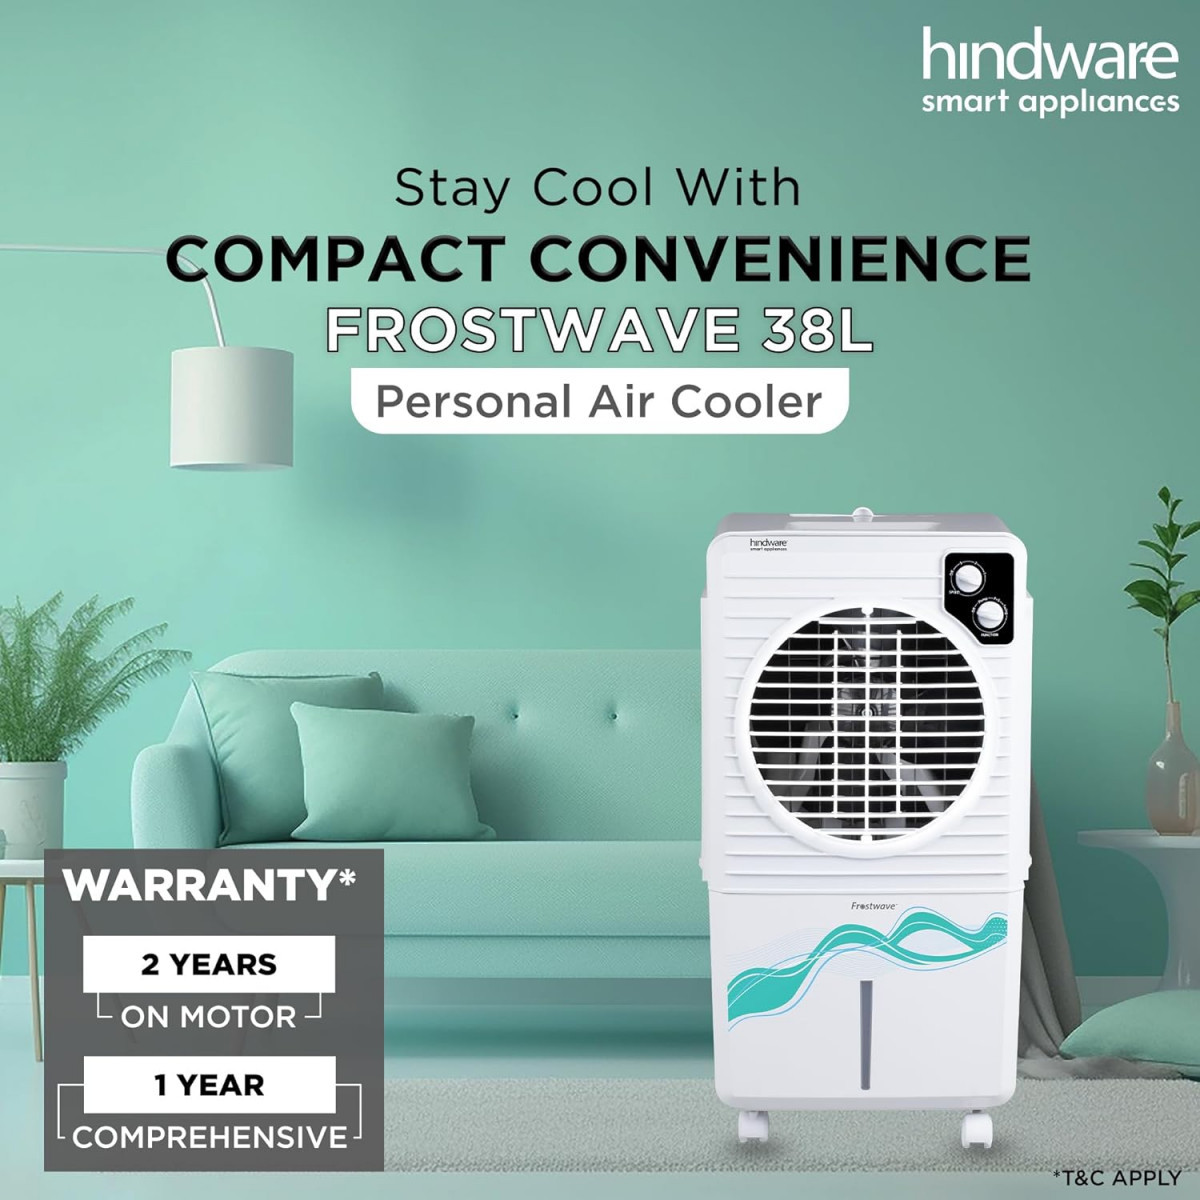 Hindware Smart Appliances Frostwave 38L Personal Air cooler  Fan Based  12 Inc Fan Blade and Ice Chamber  White  Grey